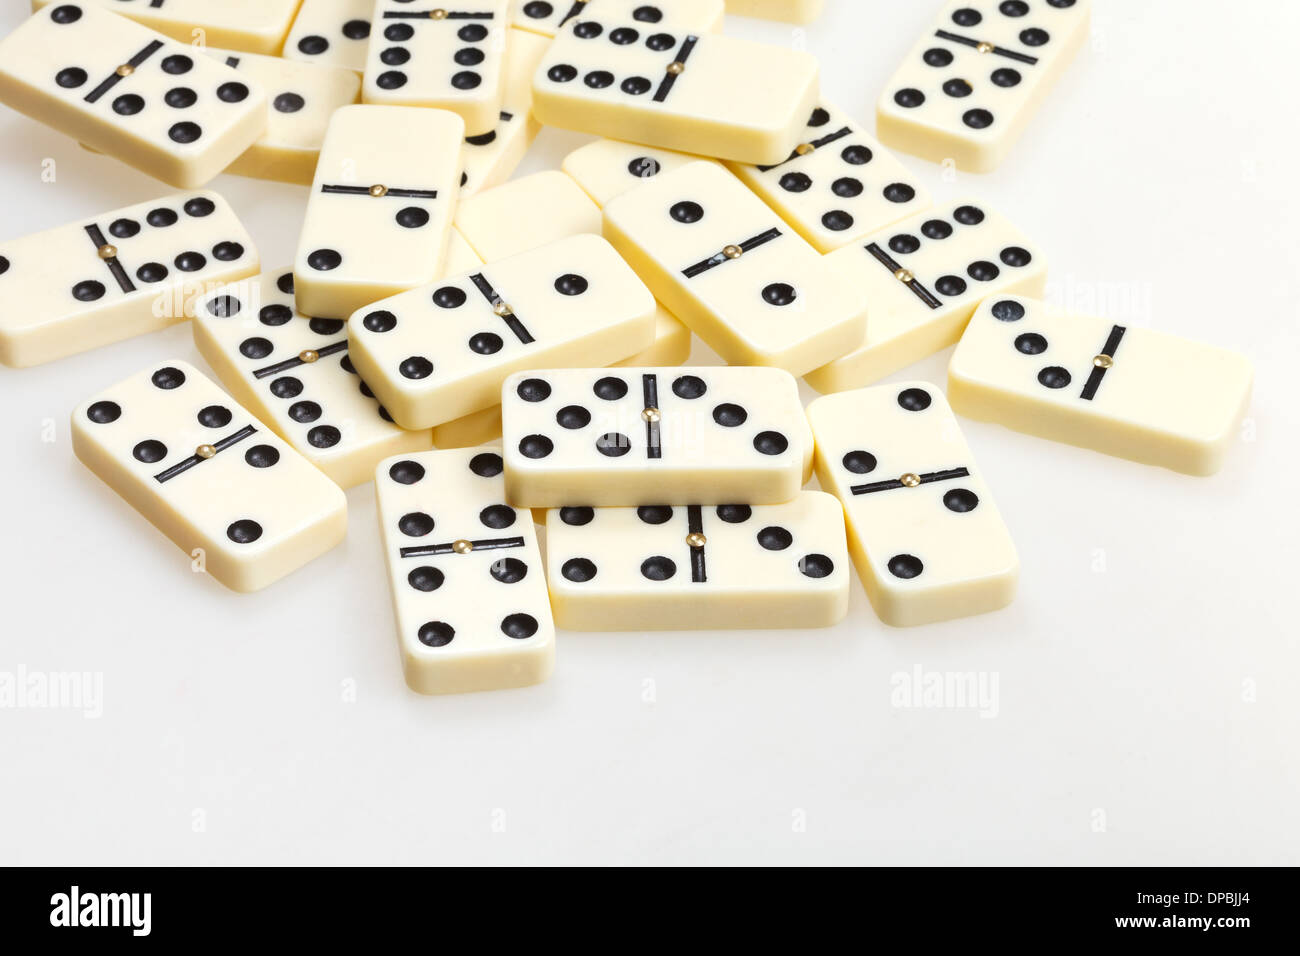 scattered dominoes on white background close up Stock Photo